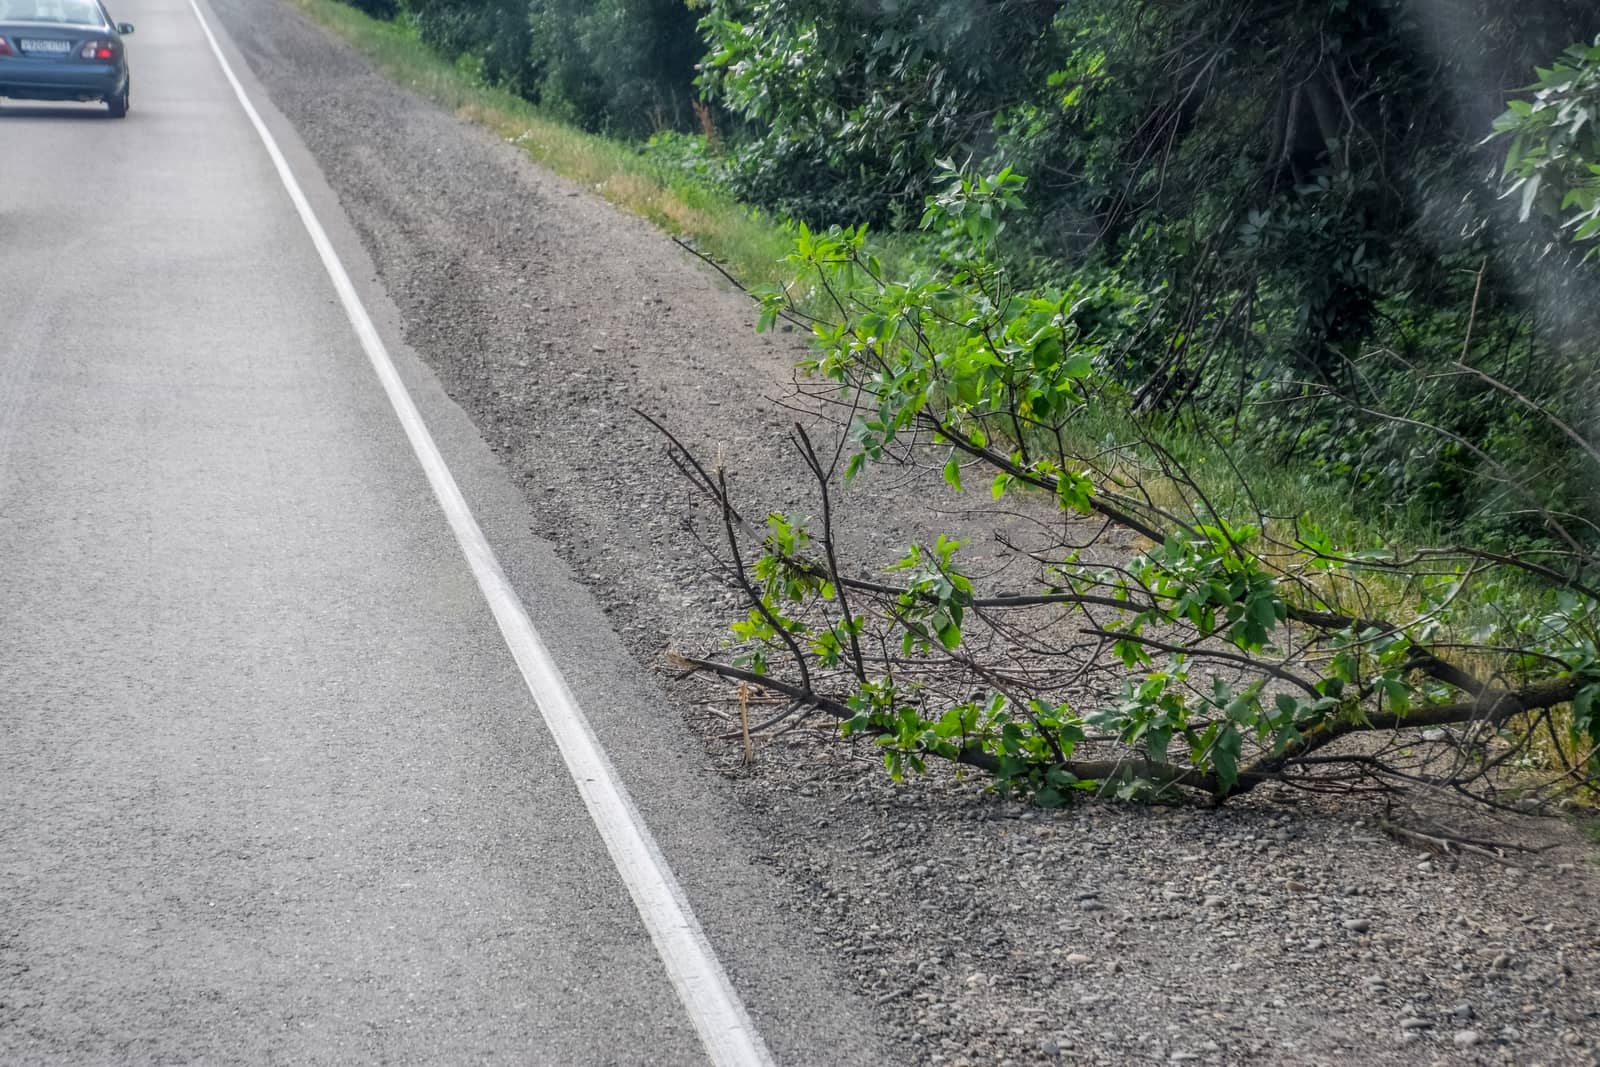 The branch fell on the road and interferes with traffic.